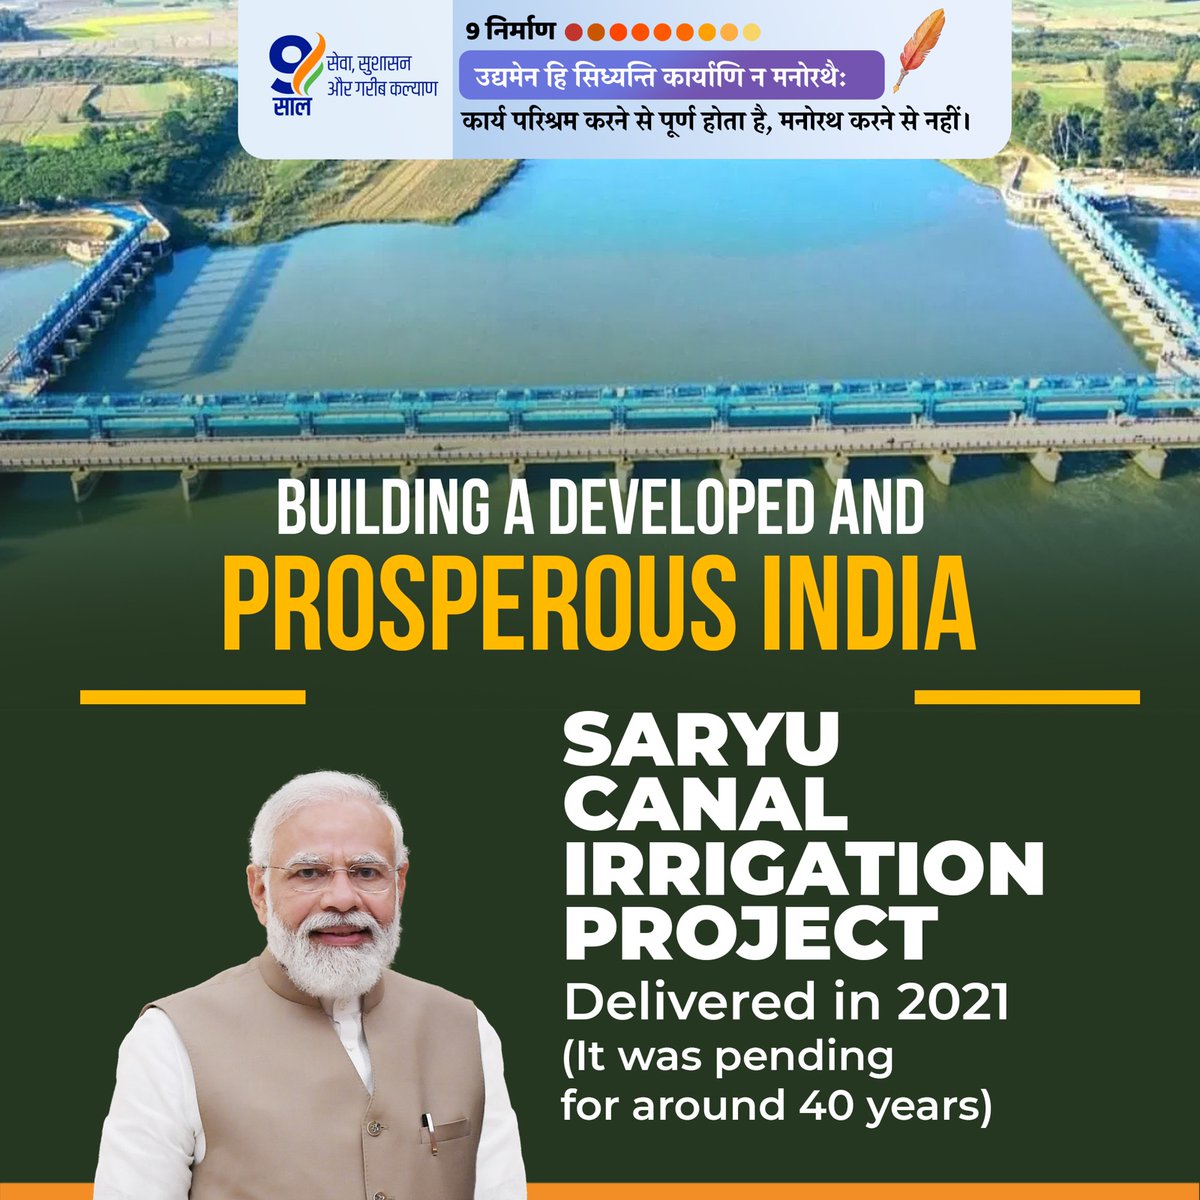 Saryu Canal Irrigation Project which was stalled for around 40 years, was finally delivered by the Modi Govt! 

#NavNirmanKe9Saal